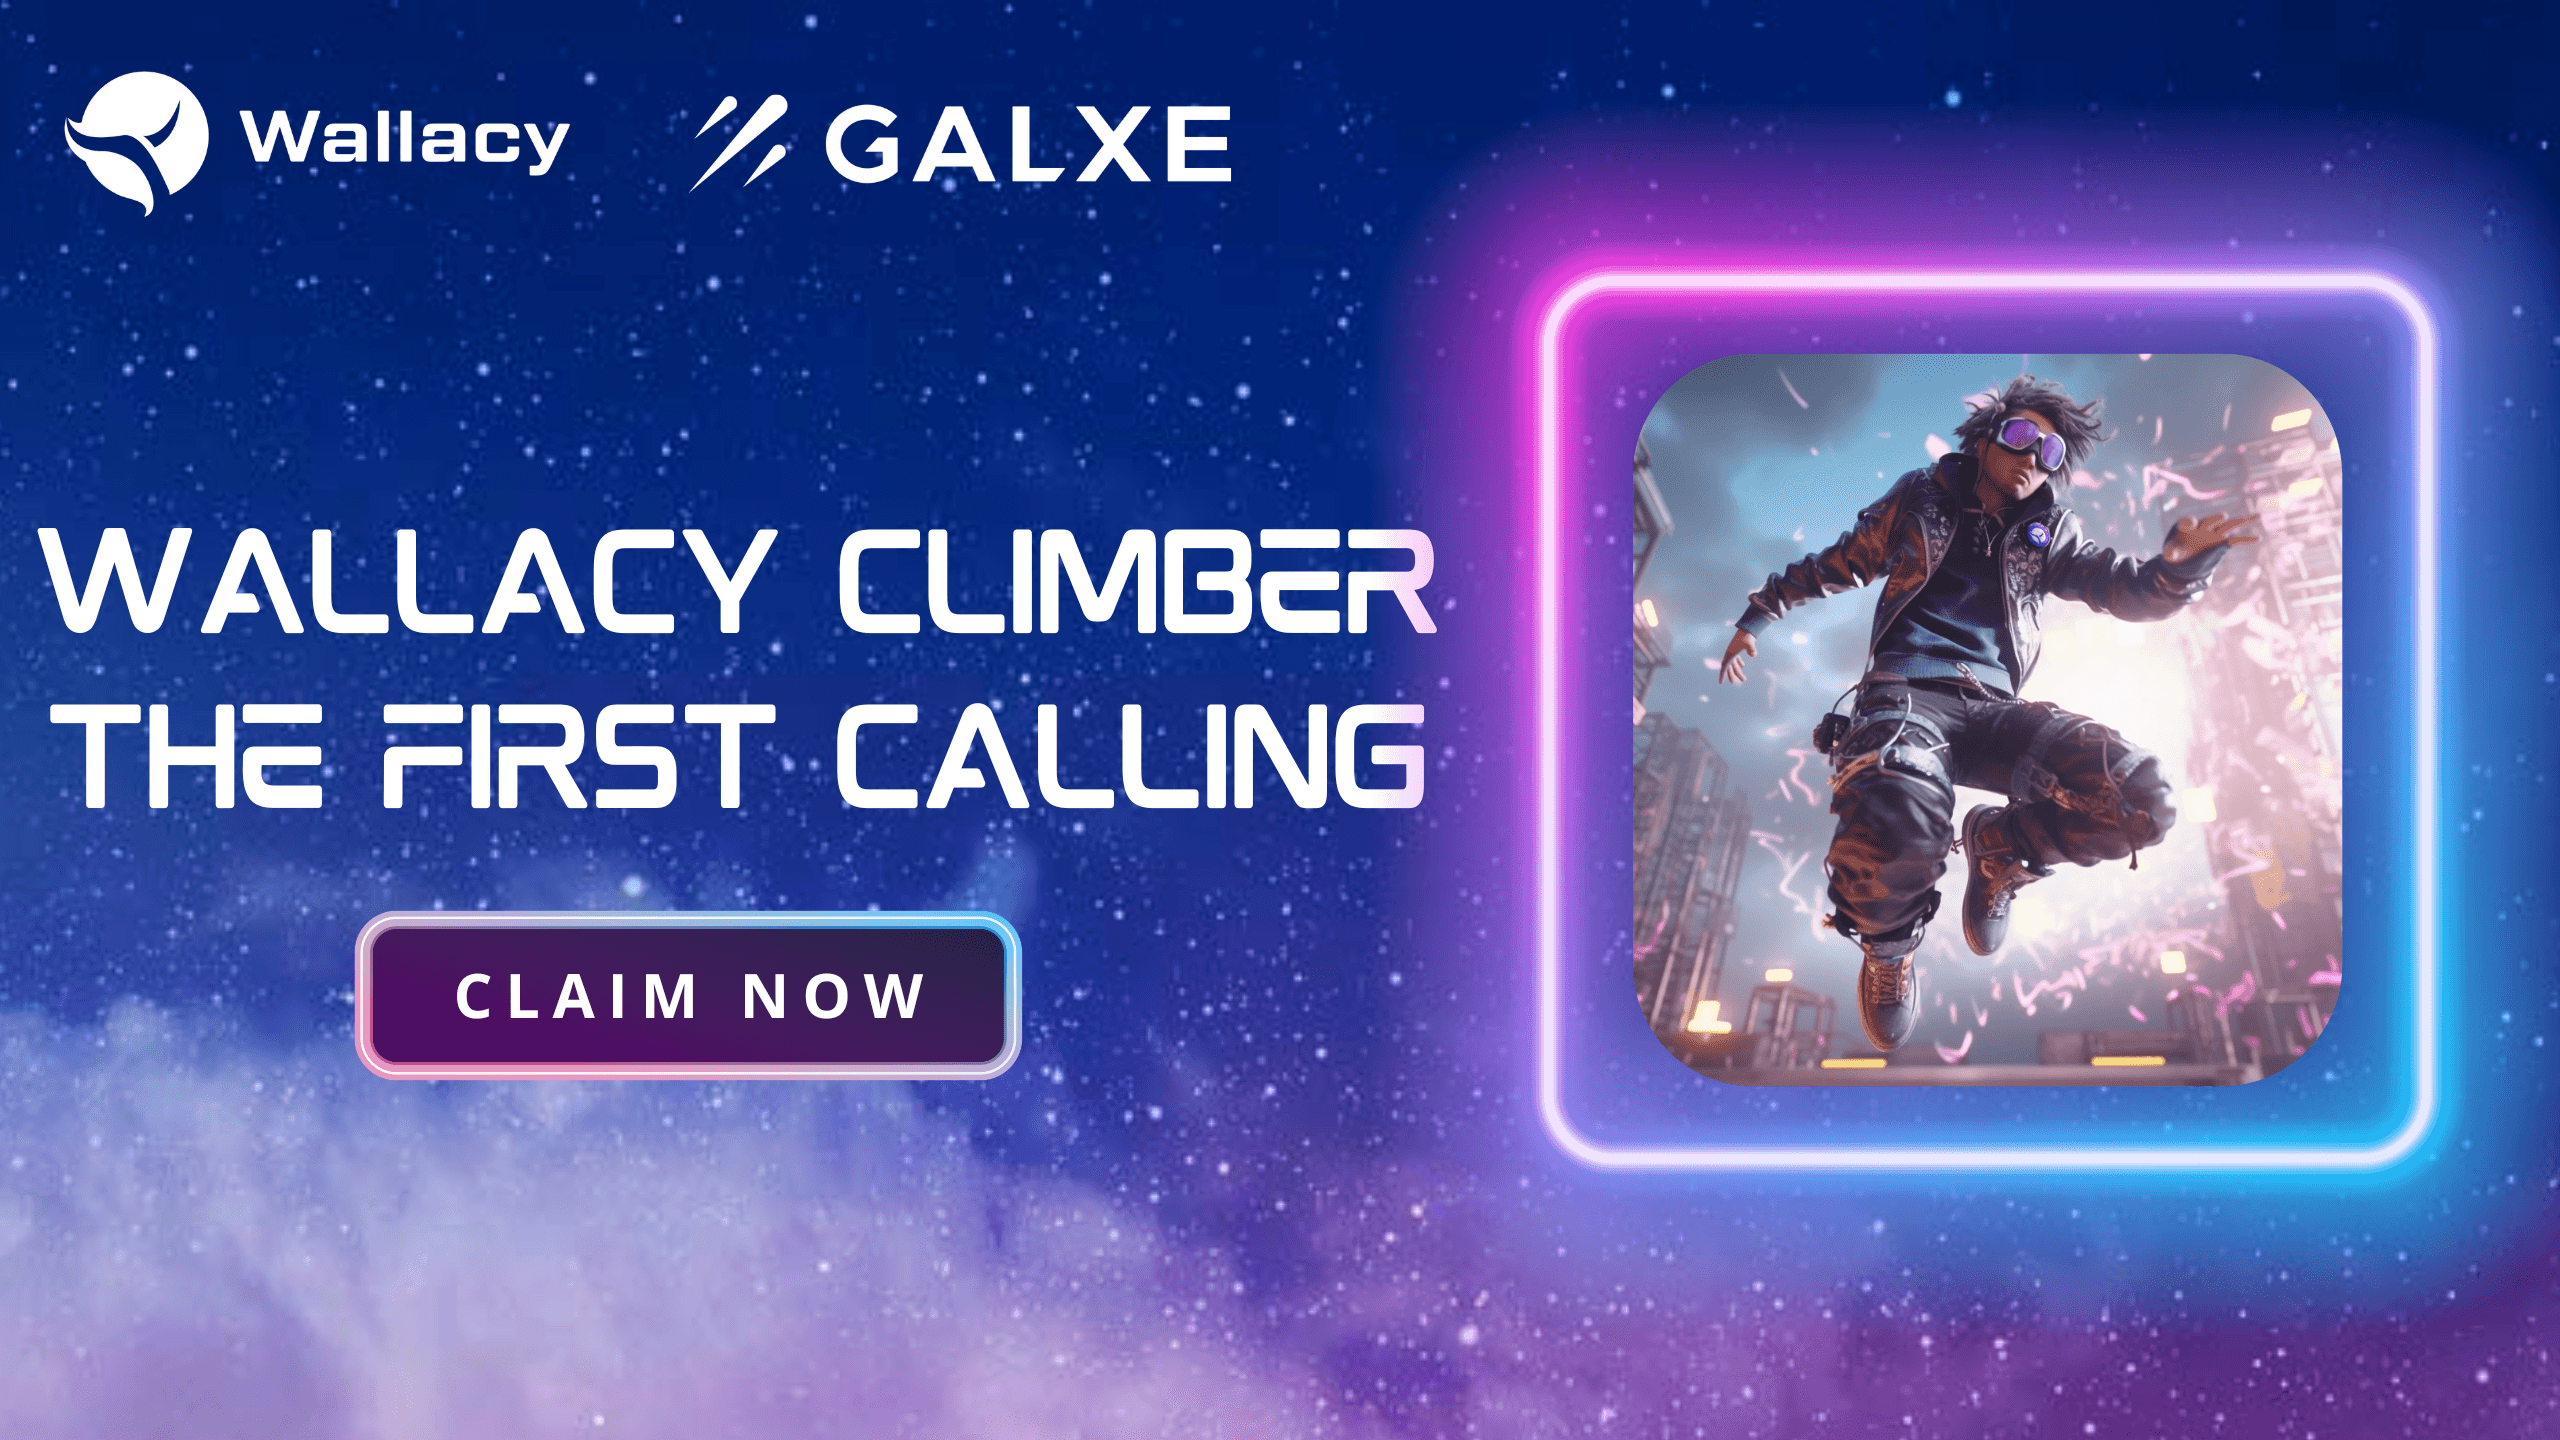 Introducing the Wallacy Climber - The first Calling NFT